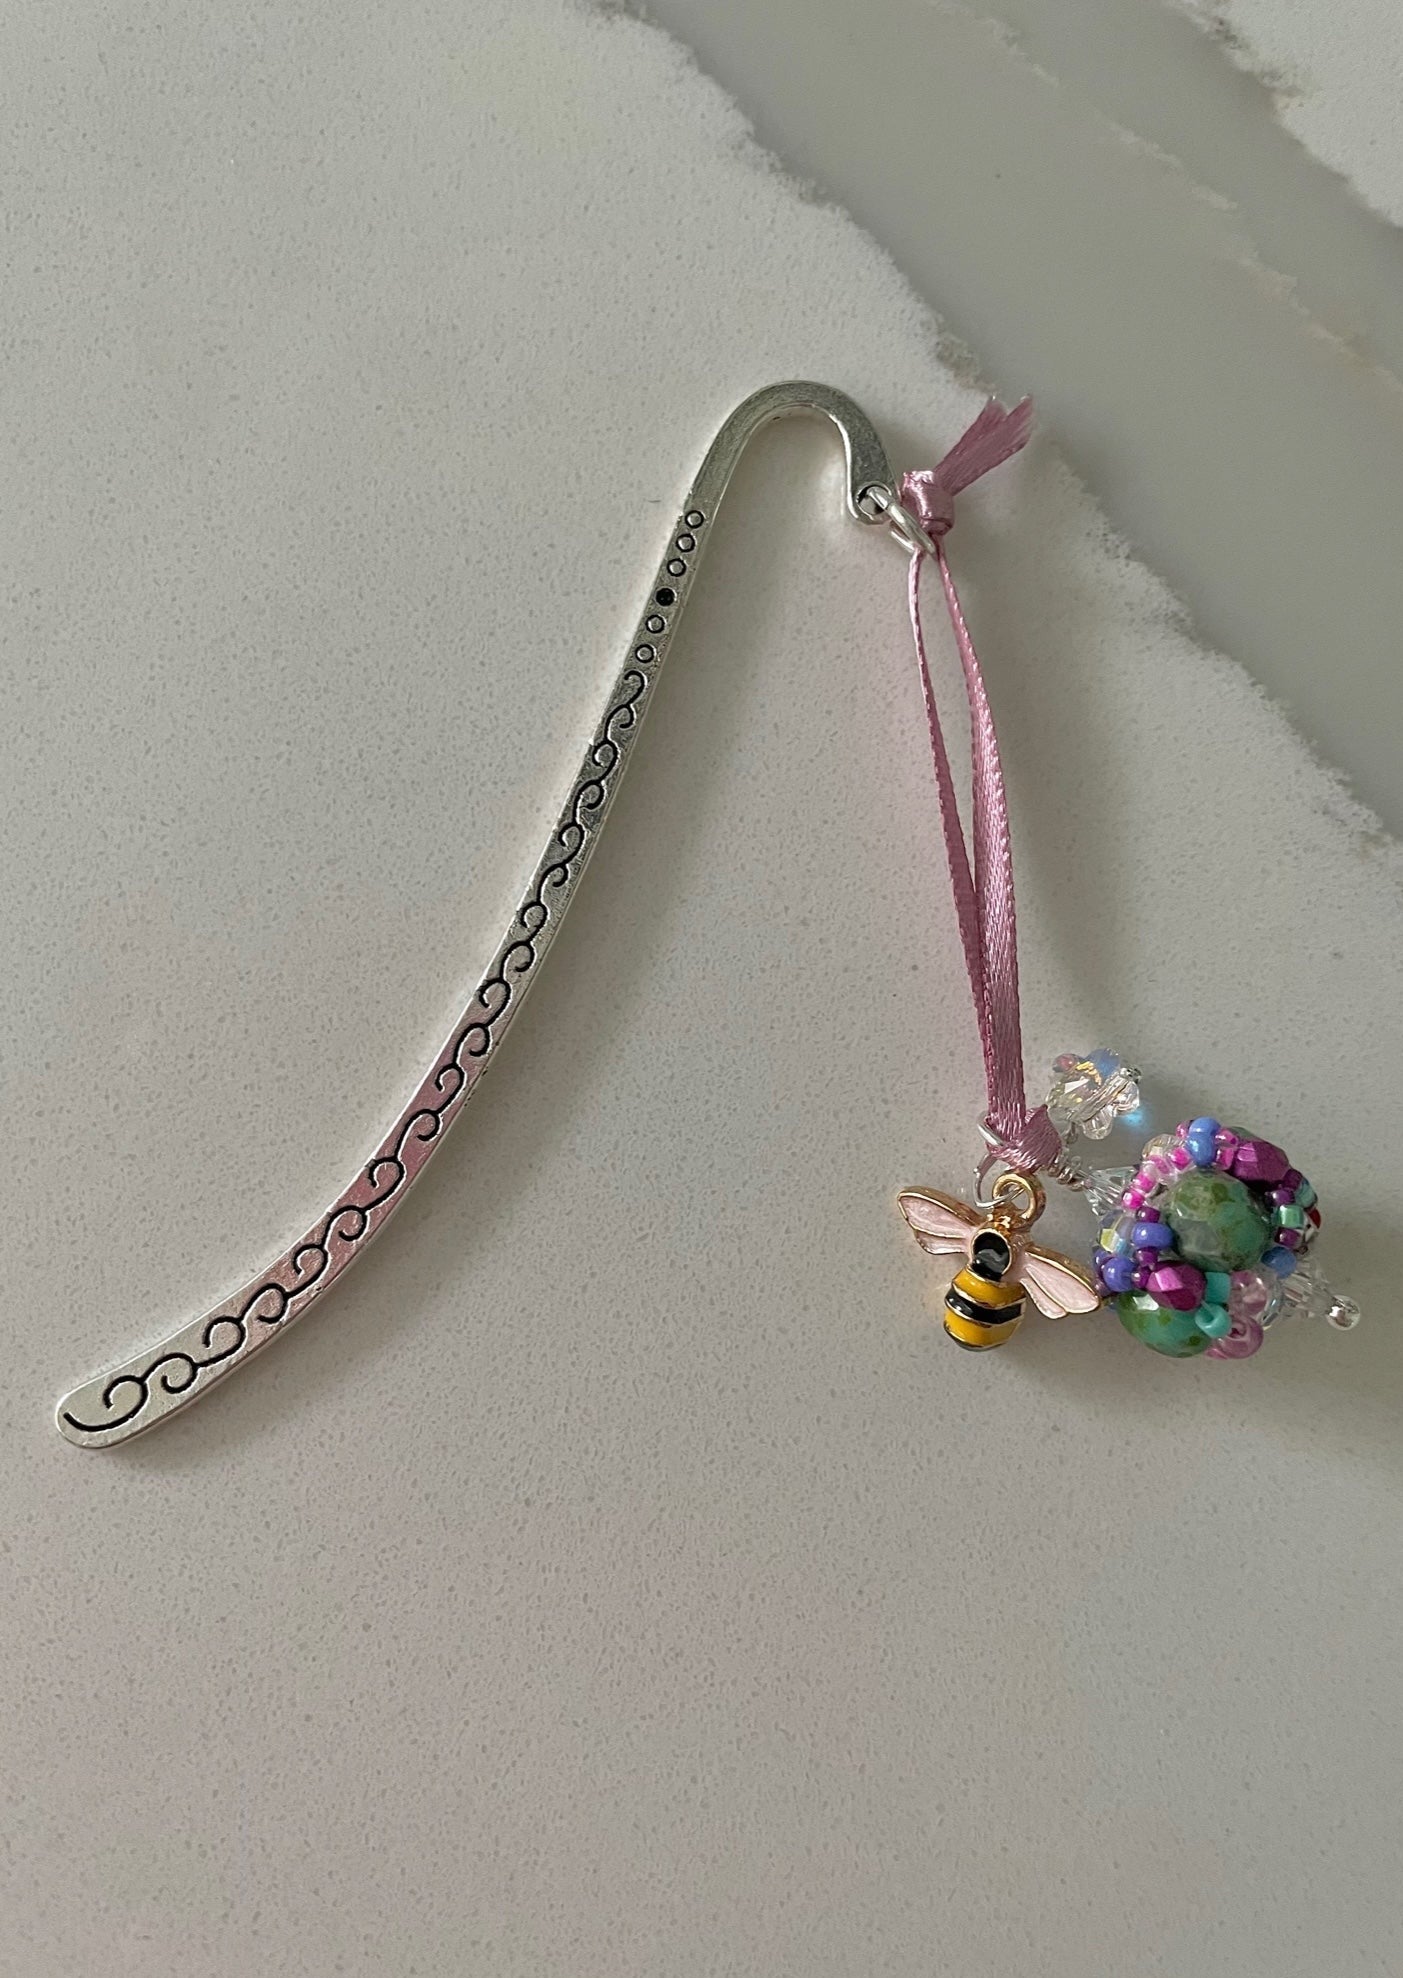 Hand Beaded Bridge of Flowers Inspired Bookmark made by Mango Fish Inc in Western MA